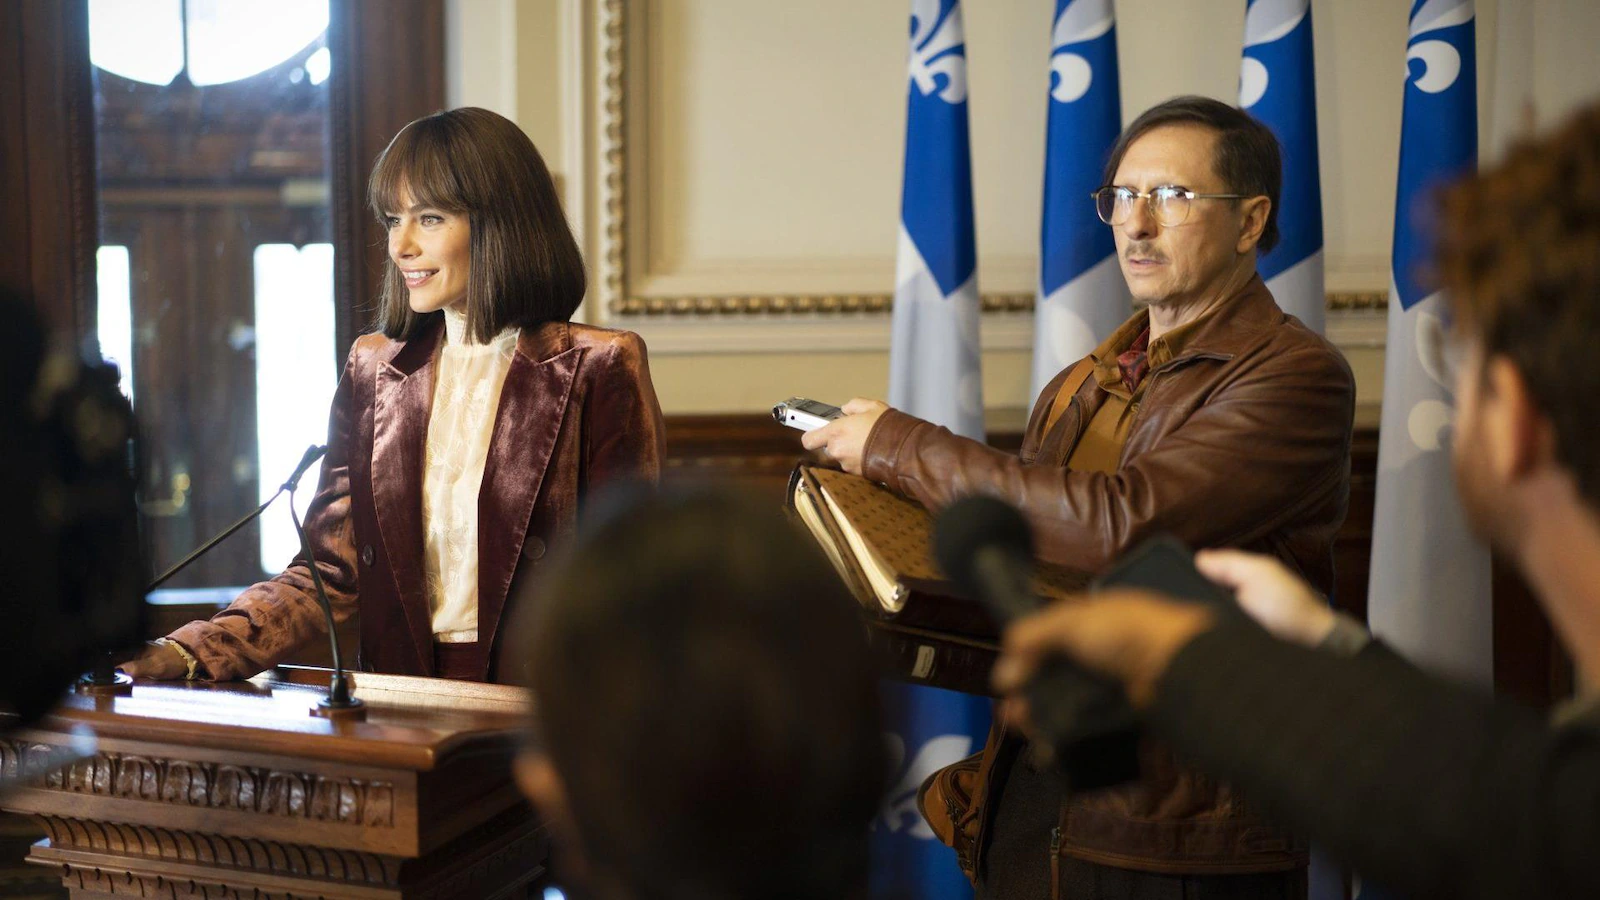 The woman speaks into a microphone behind a podium in a place reminiscent of the National Assembly Press Room, and behind them are Quebec flags.  A man holds a tape recorder next to her.